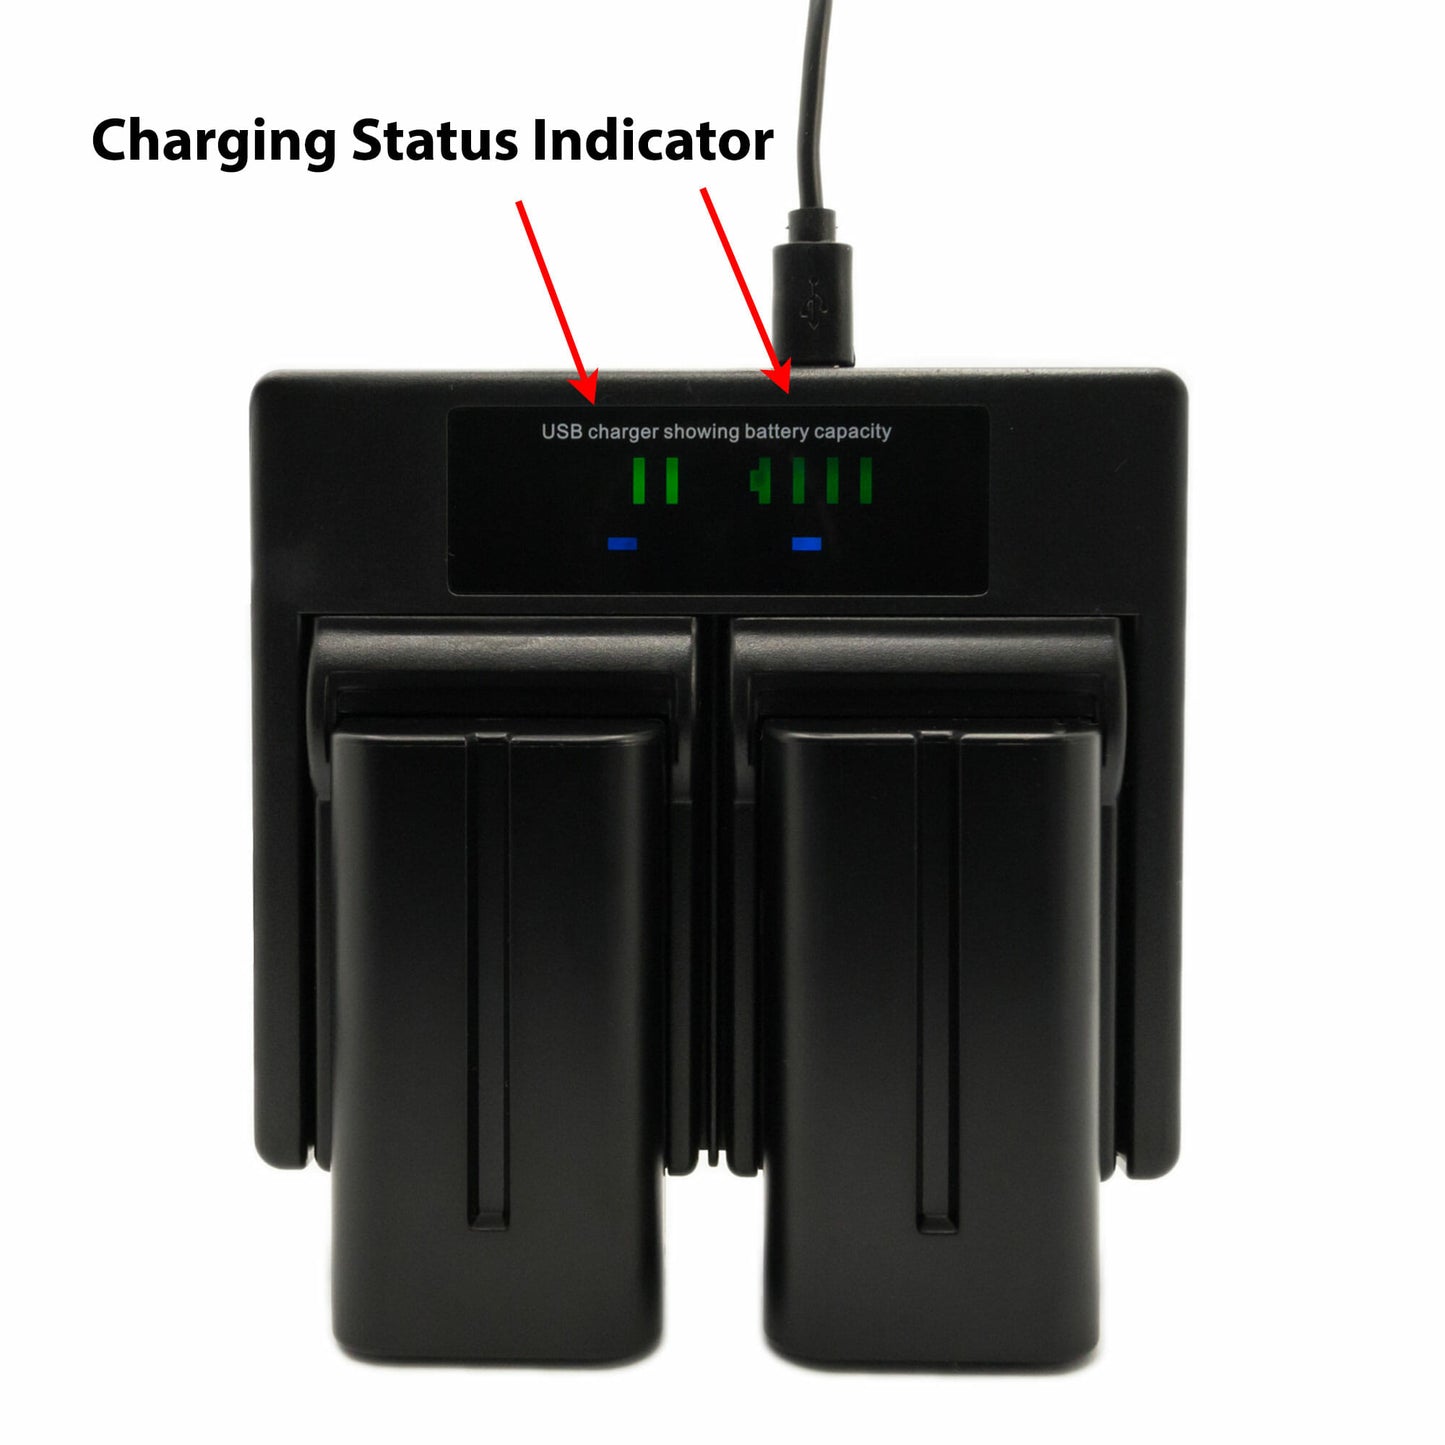 Hridz NP-F550 Battery Charger Set Compatible with Sony NP-F series